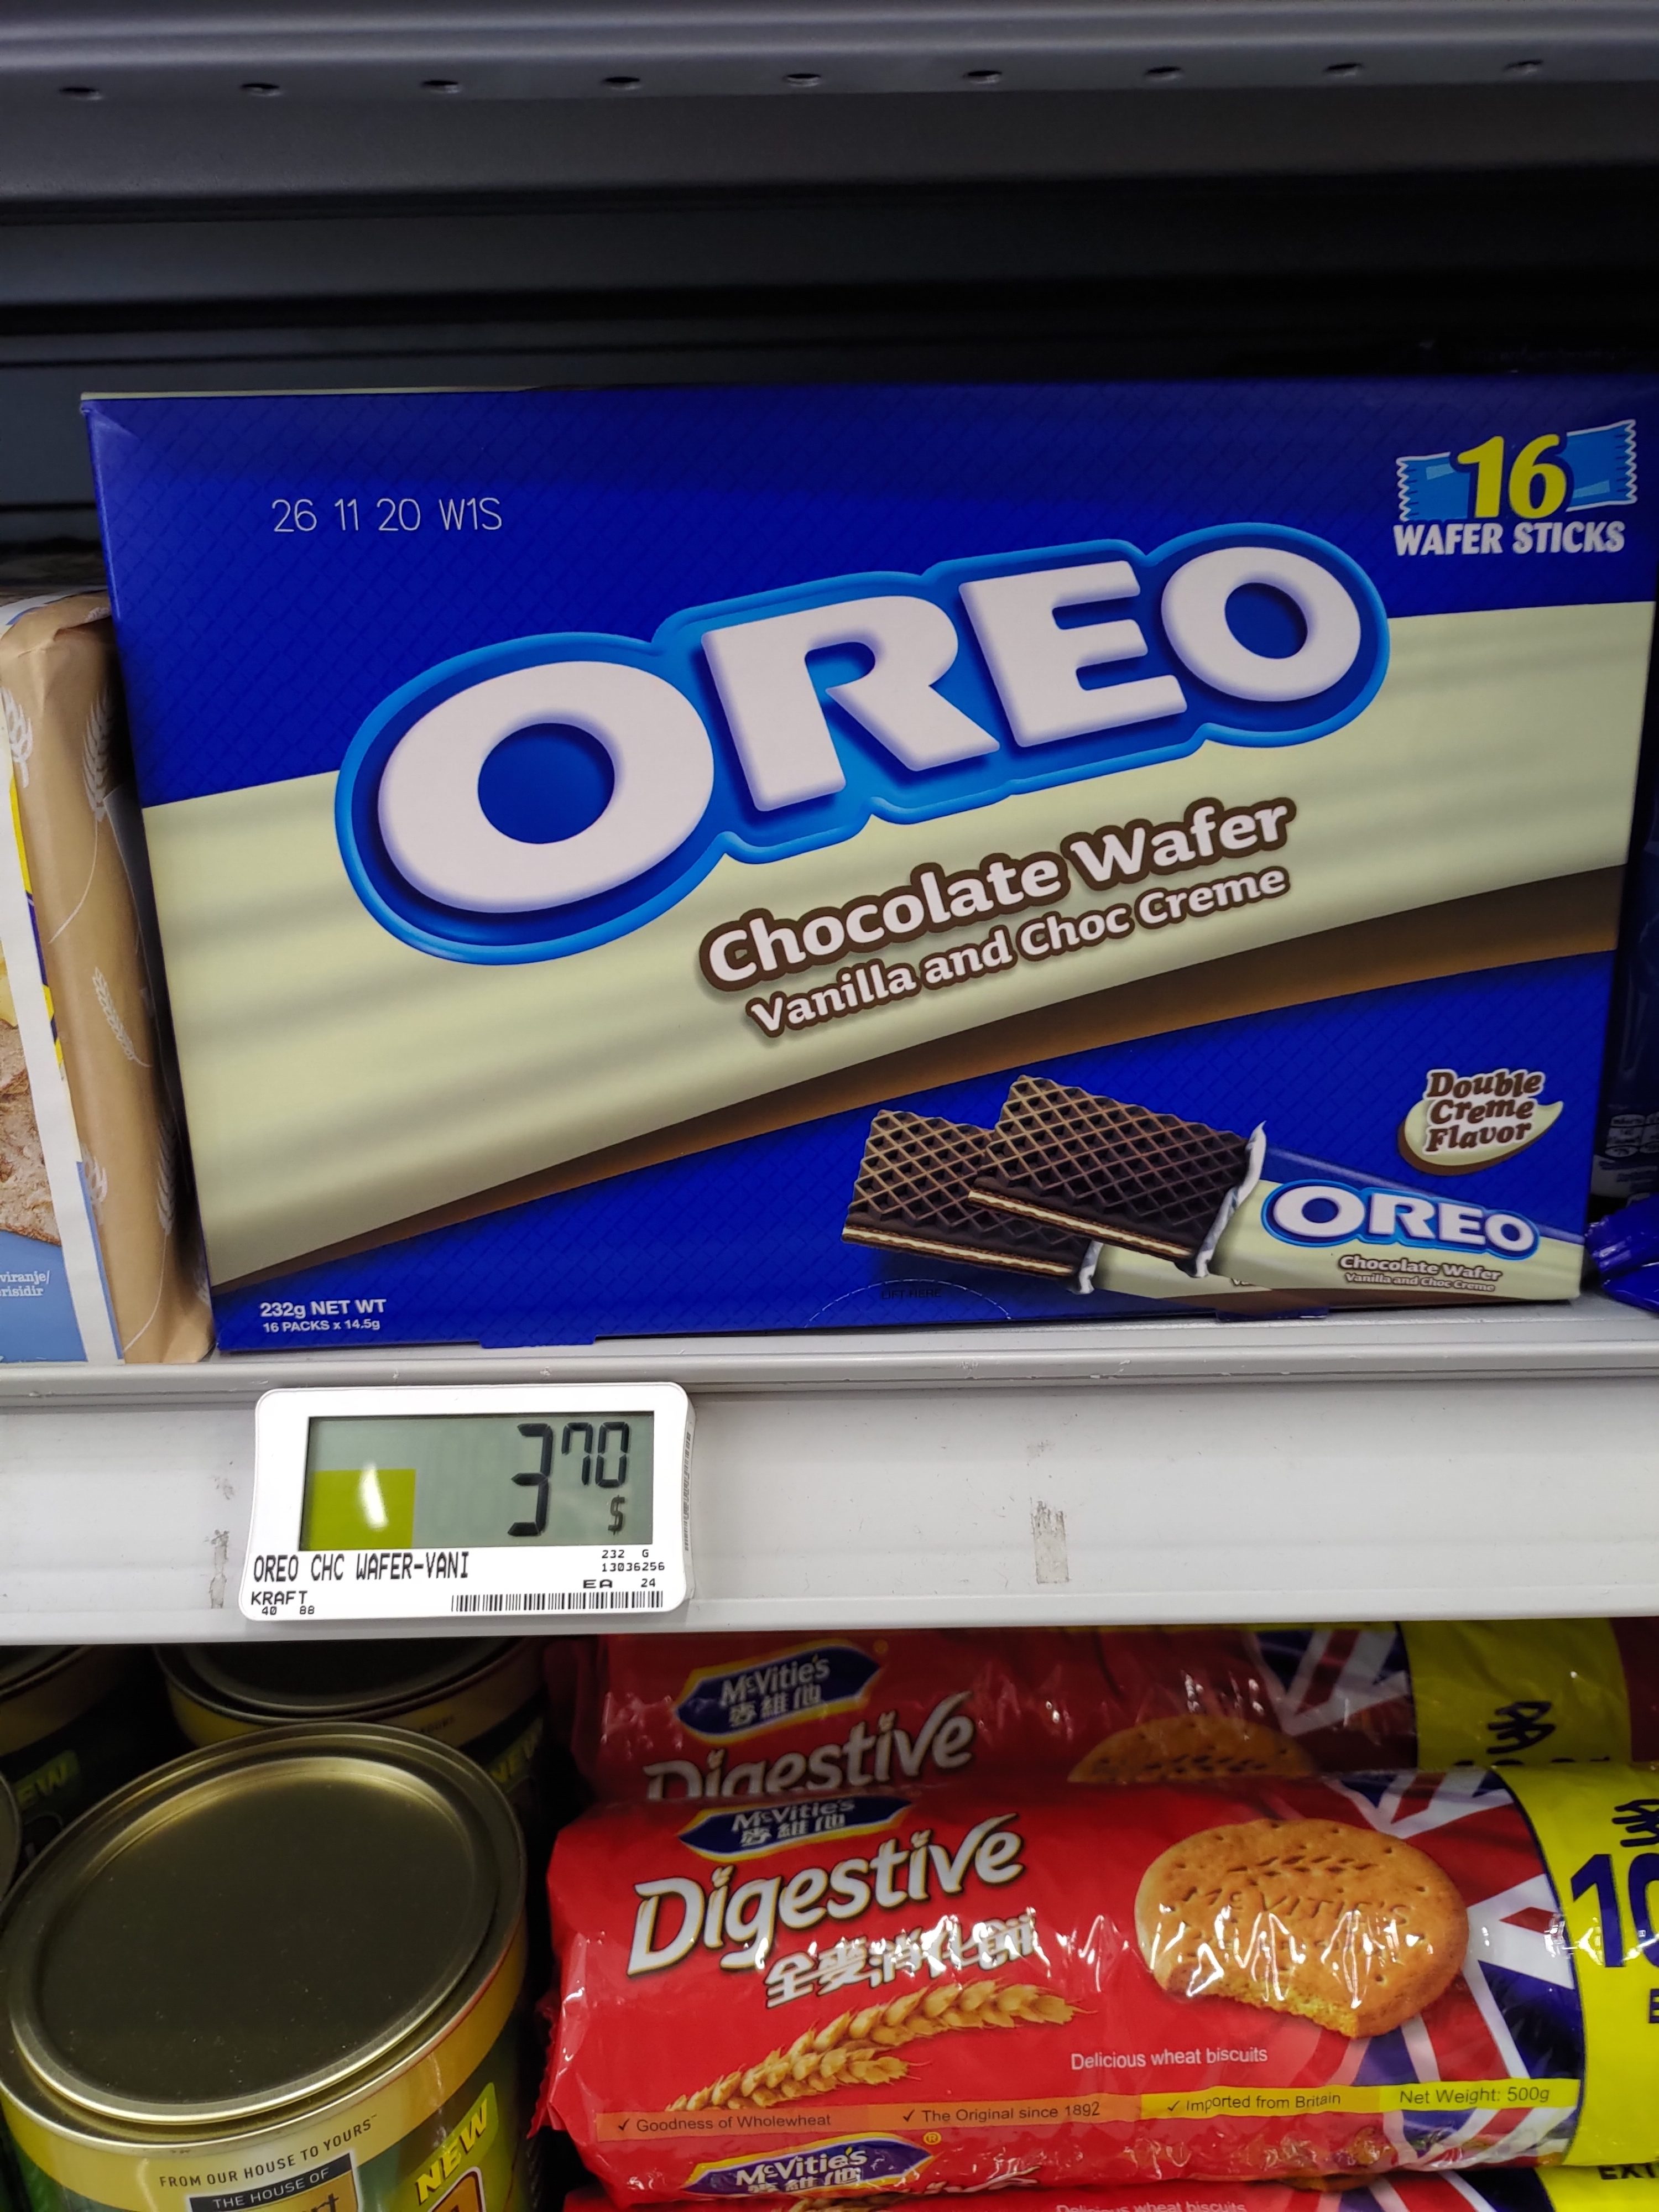 Oreo Chocolate Wafer Sticks Now Available At FairPrice For $3.70 - 1